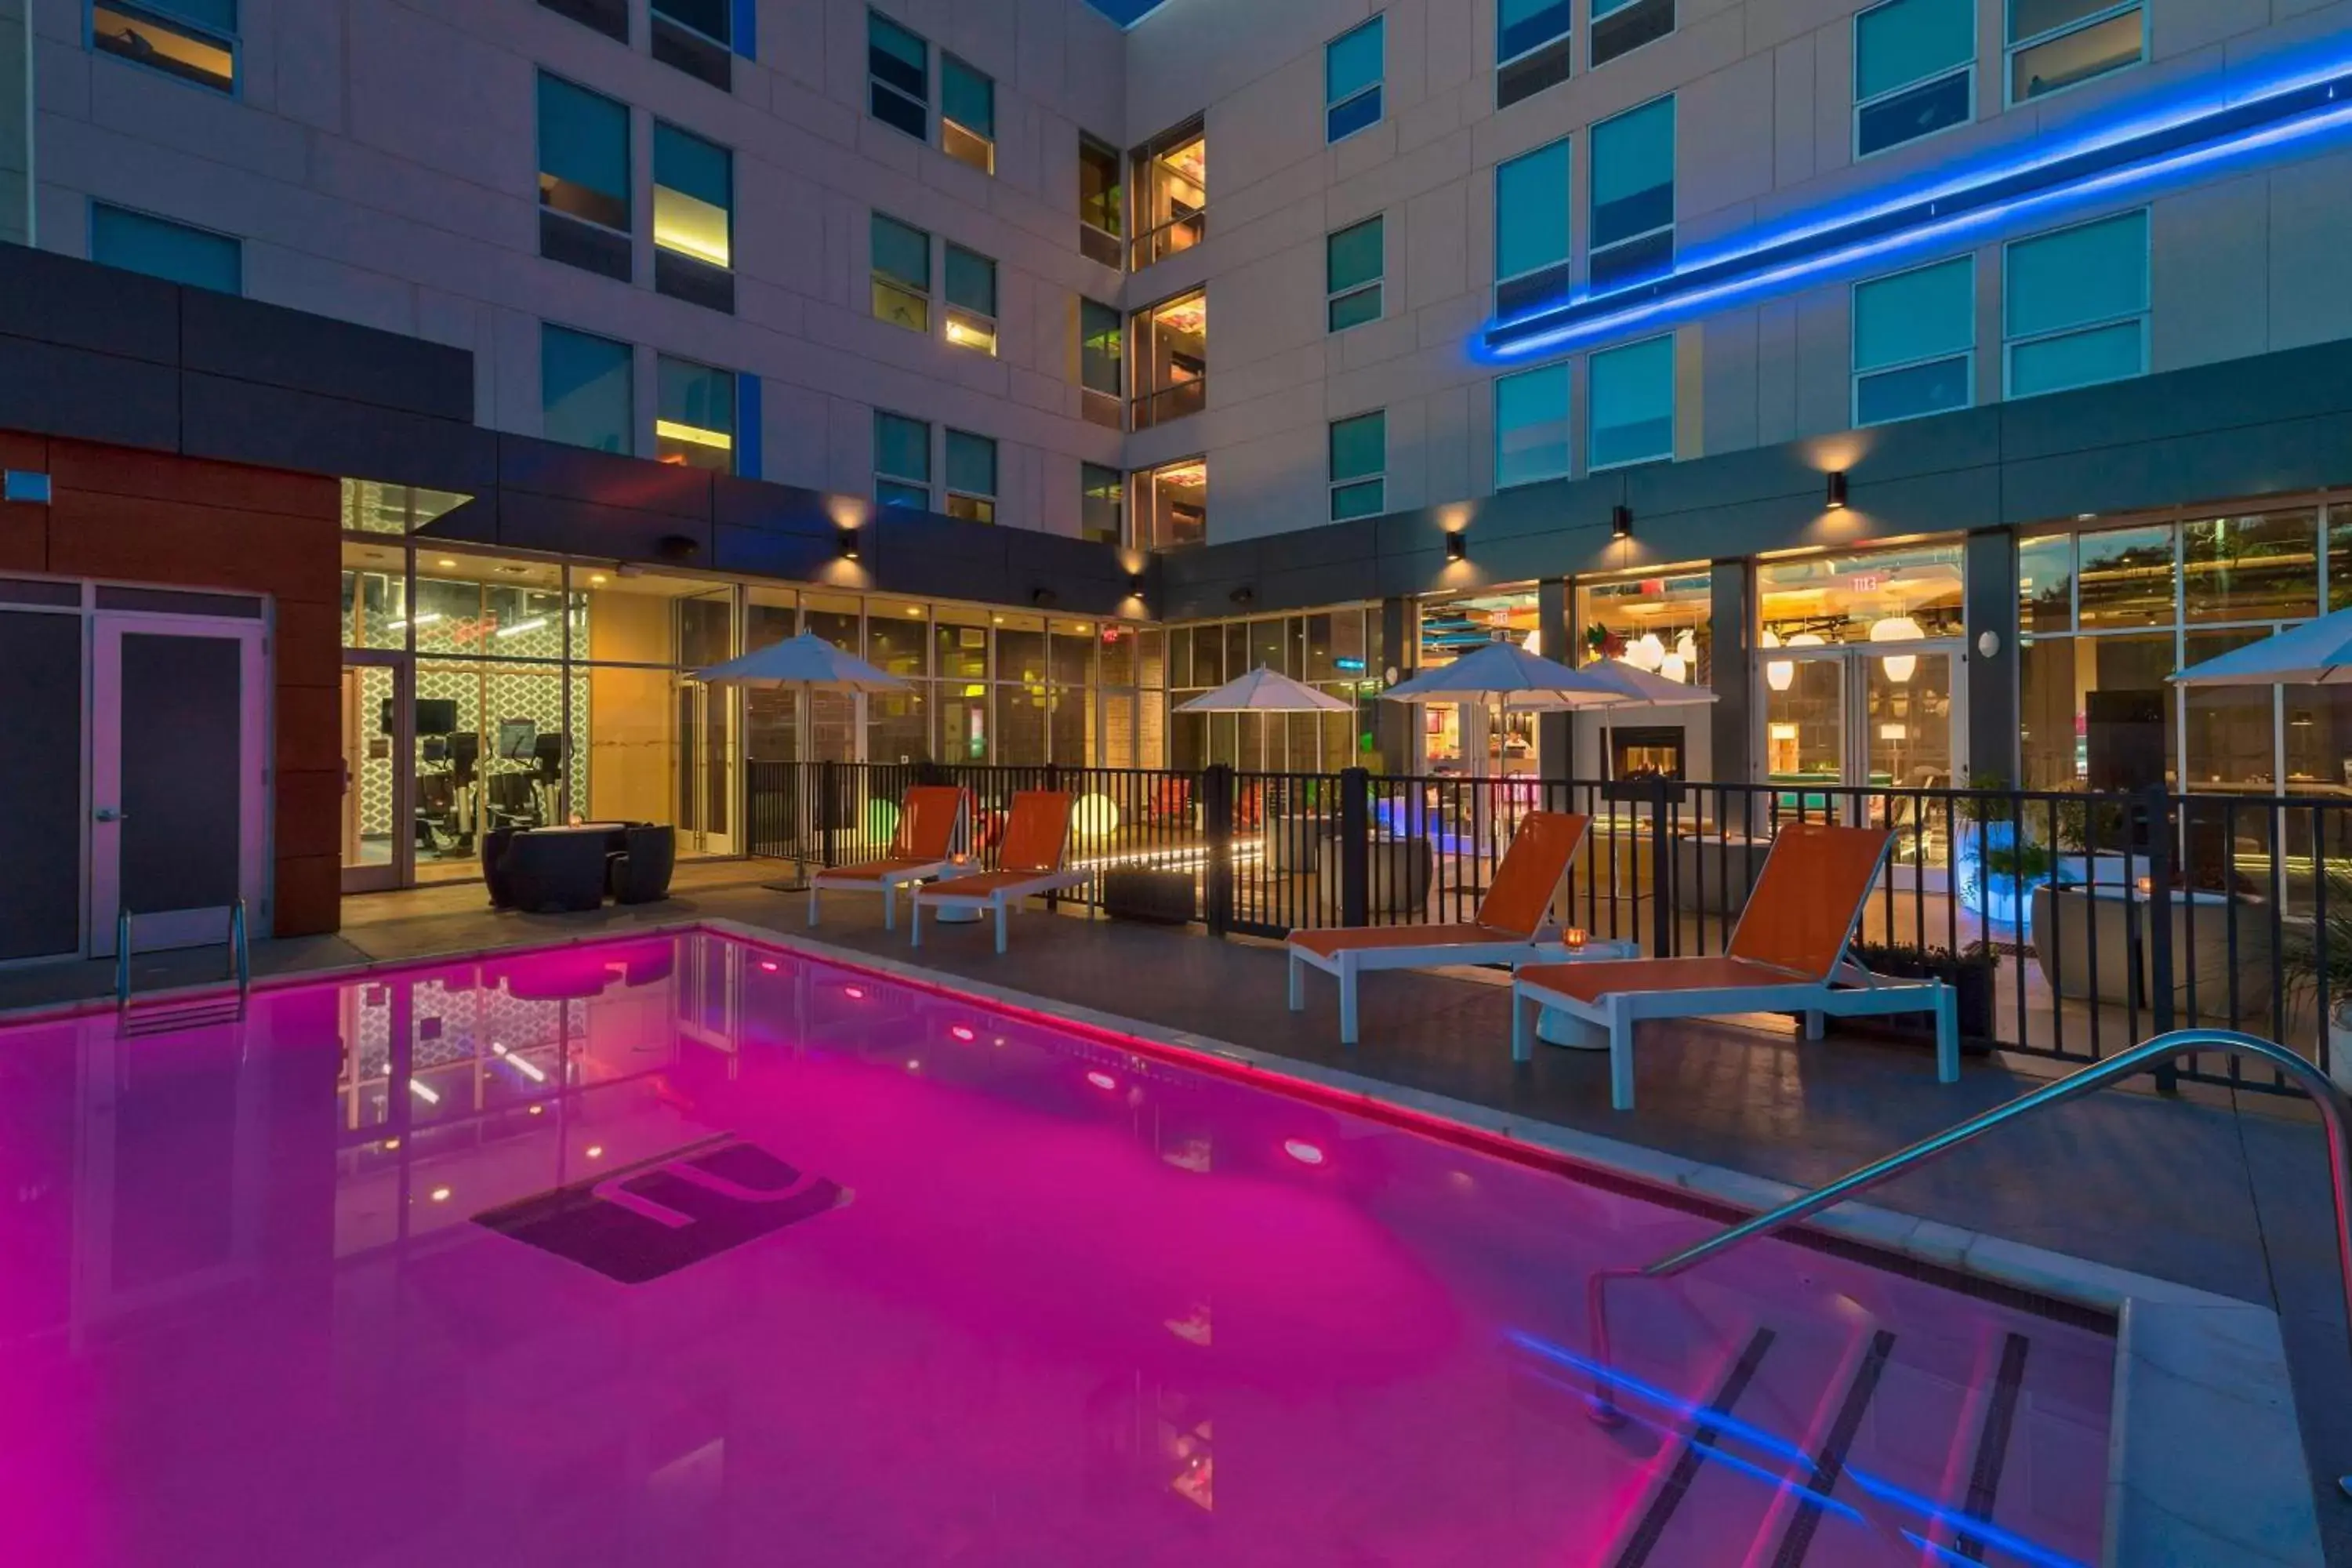 Swimming Pool in Aloft College Station